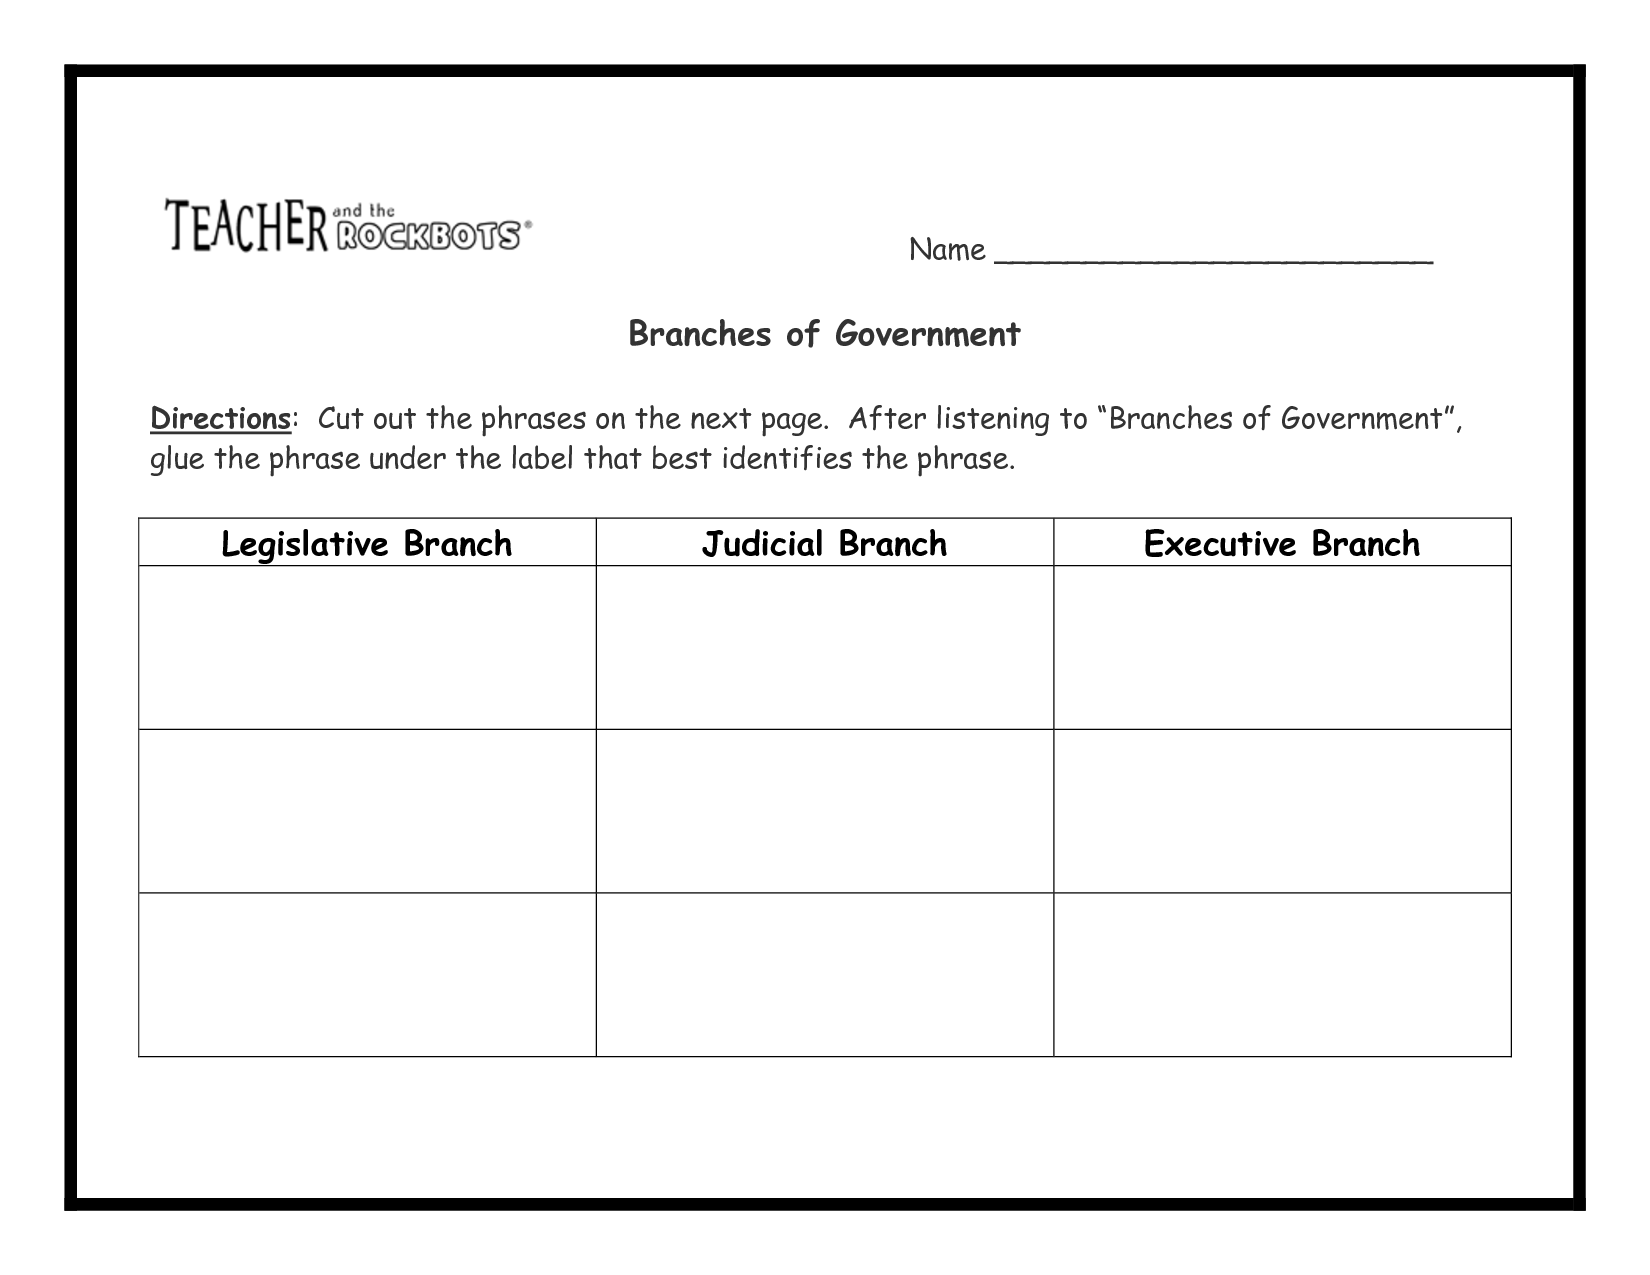 Limits Of The Branches Of Government Worksheet Answers